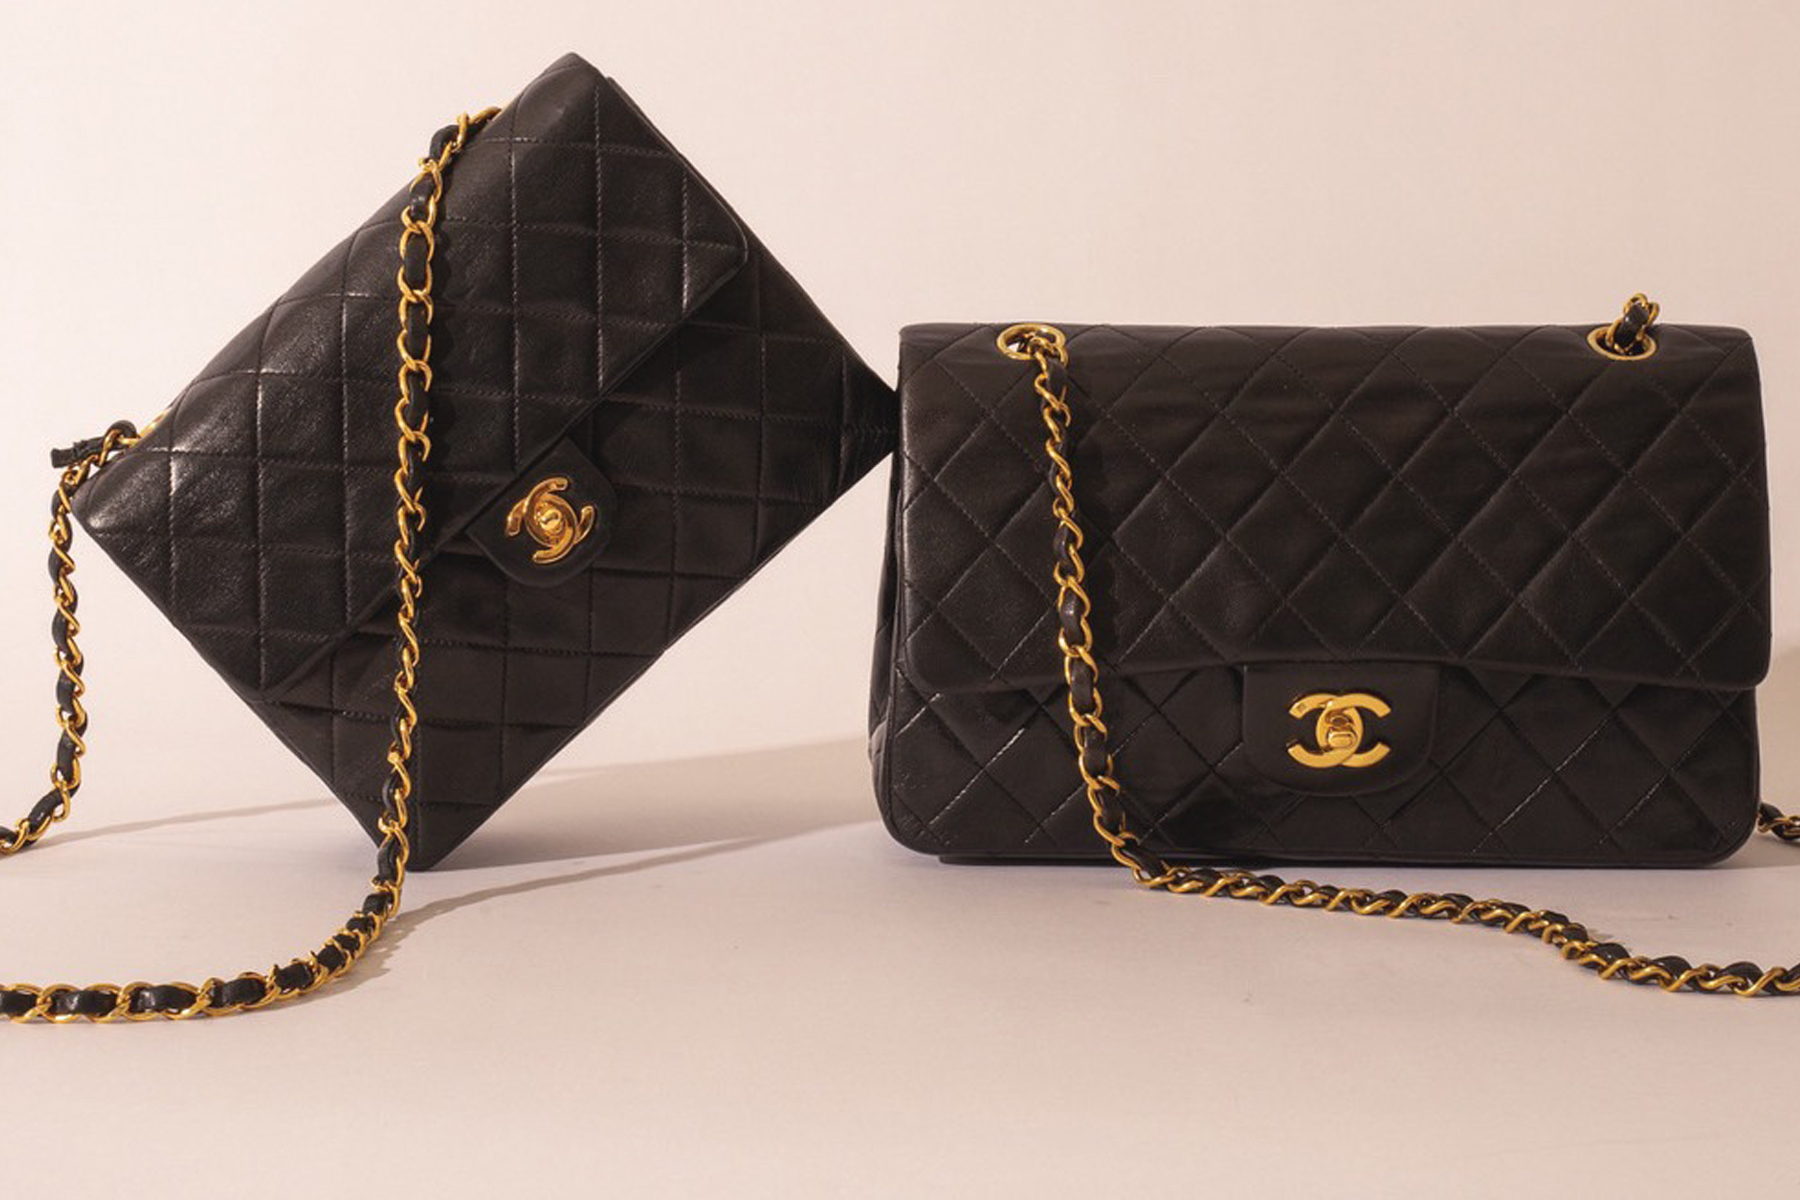 Borrow Chanel And Louis Vuitton Bags At This Four Seasons Hotel